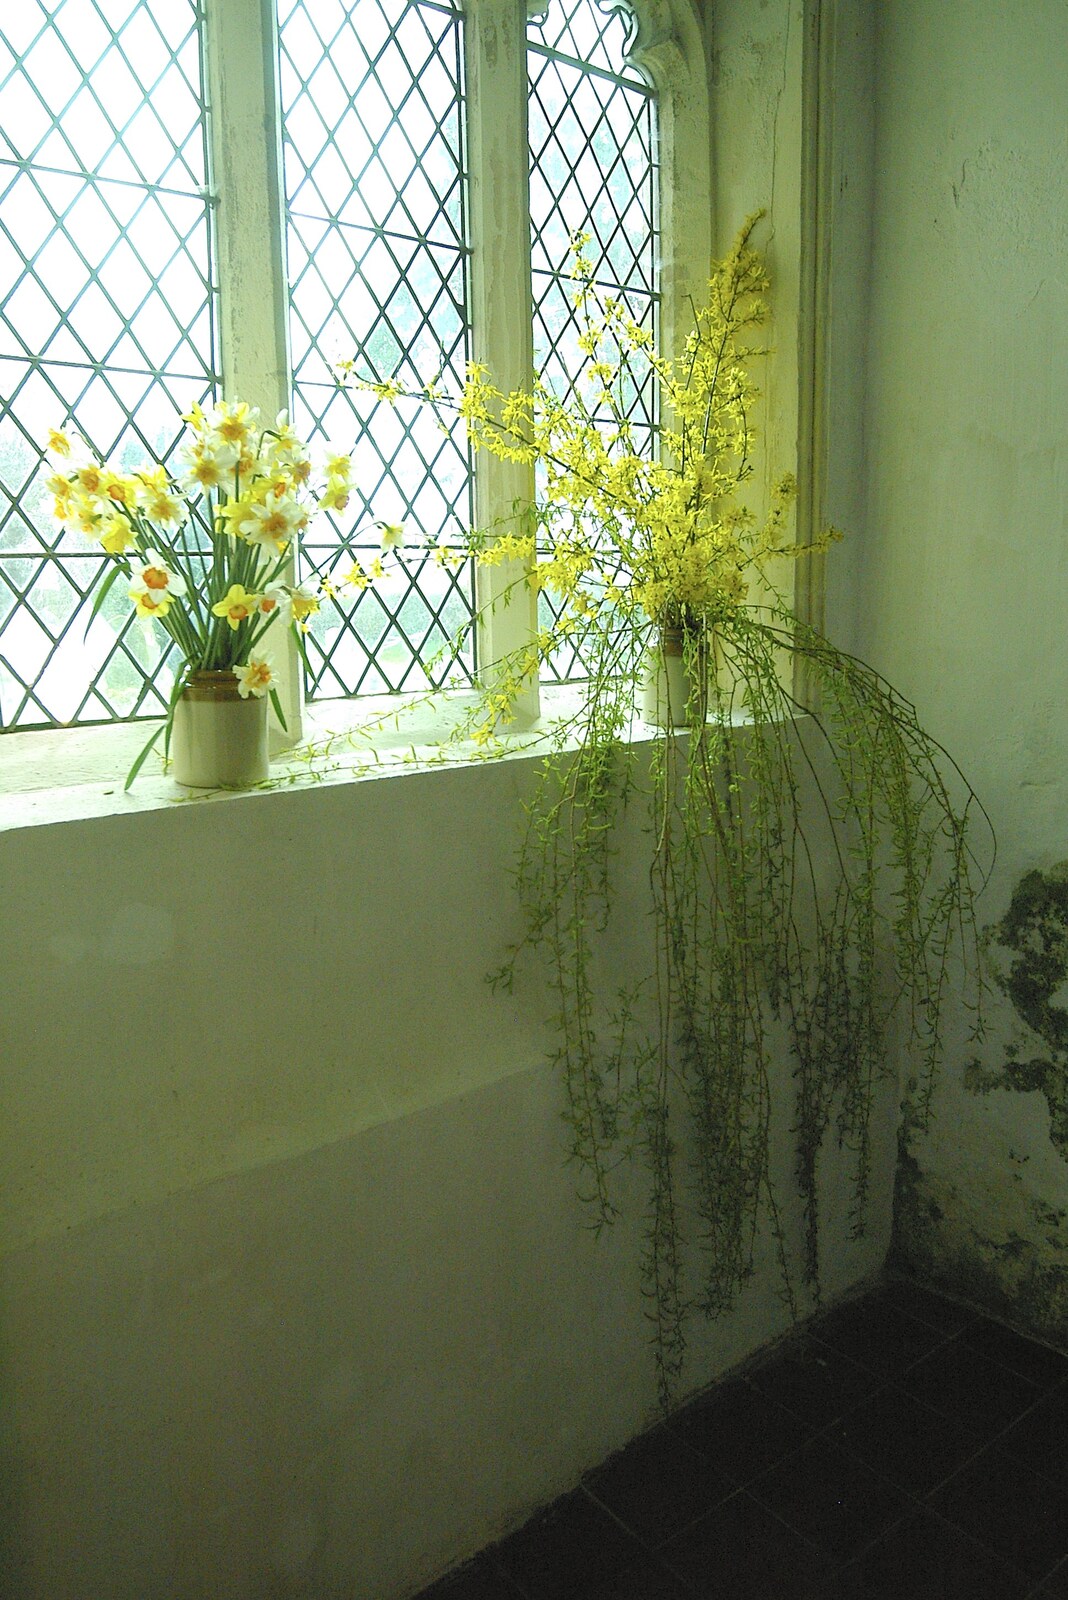 Flowers in a church window from California Snow: San Bernadino State Forest, California, US - 26th March 2006